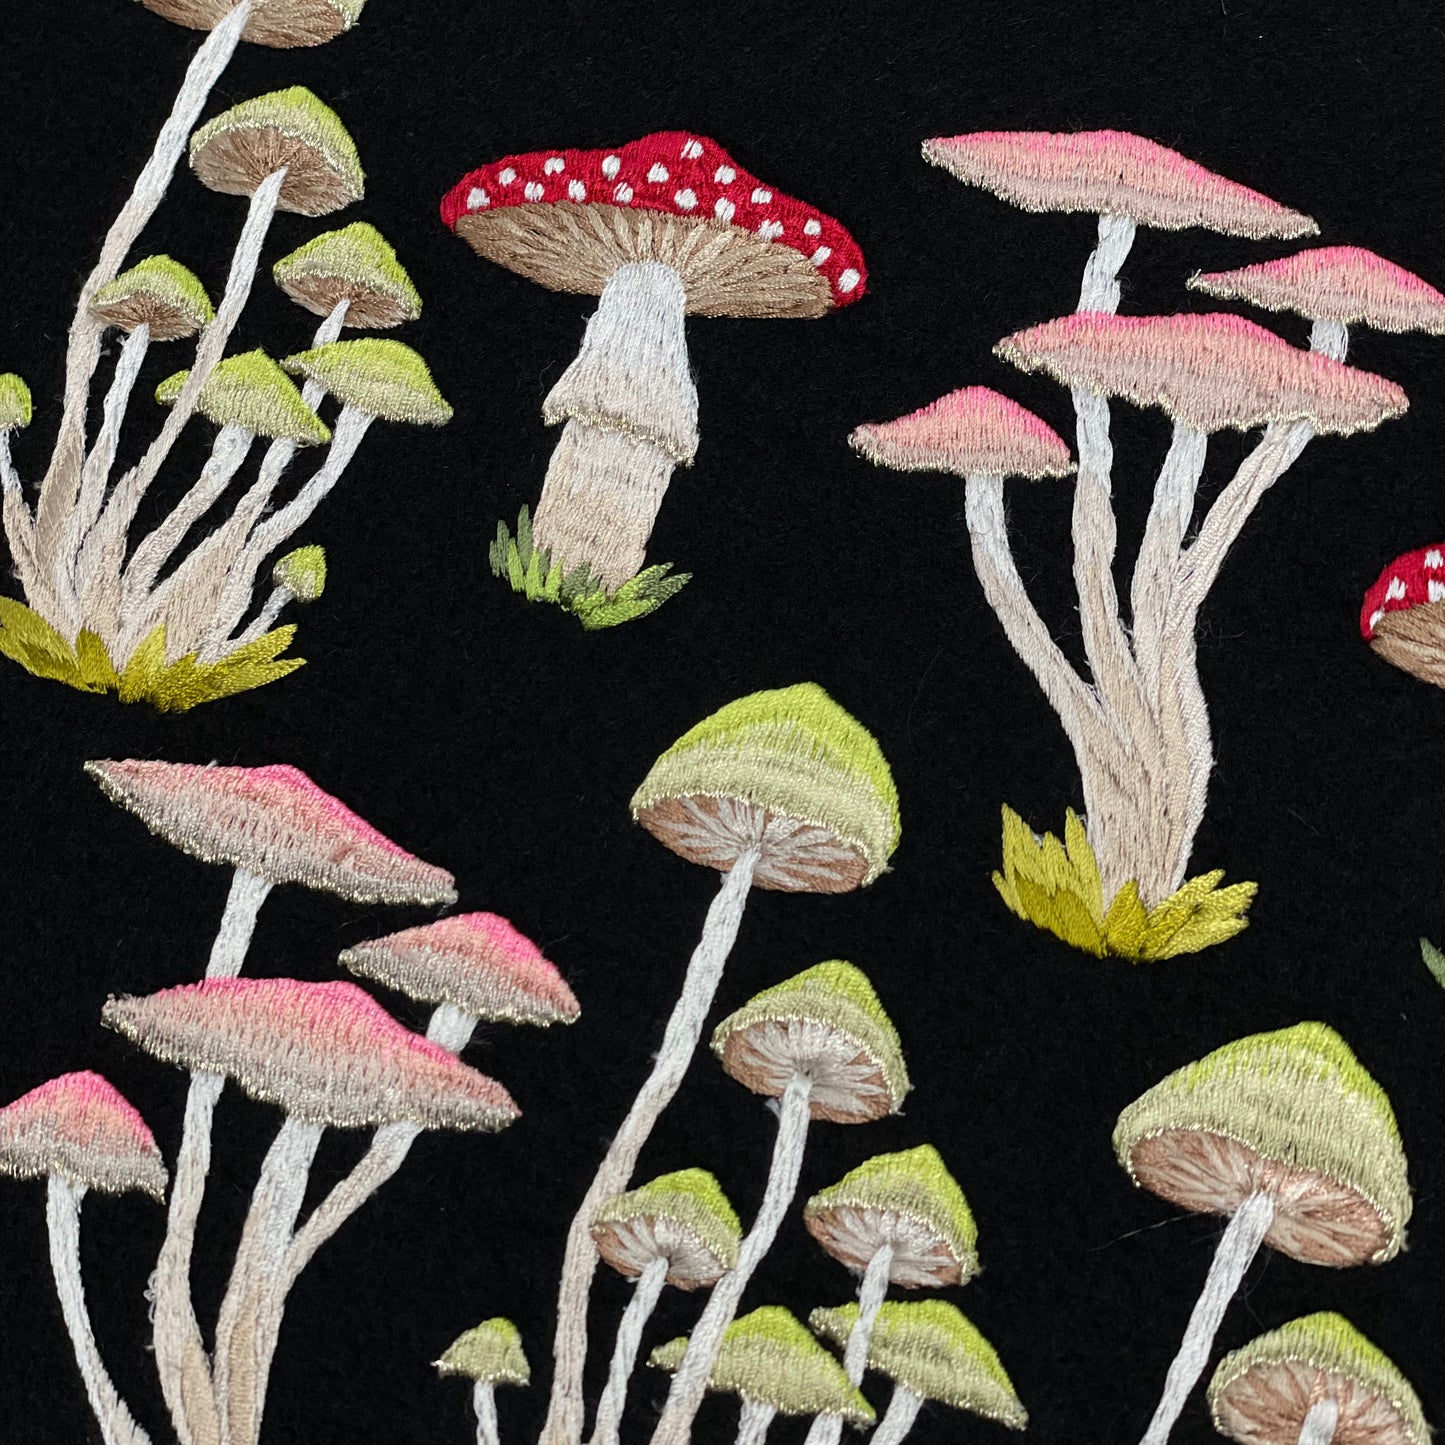 Selection of different embroidered mushrooms on black background